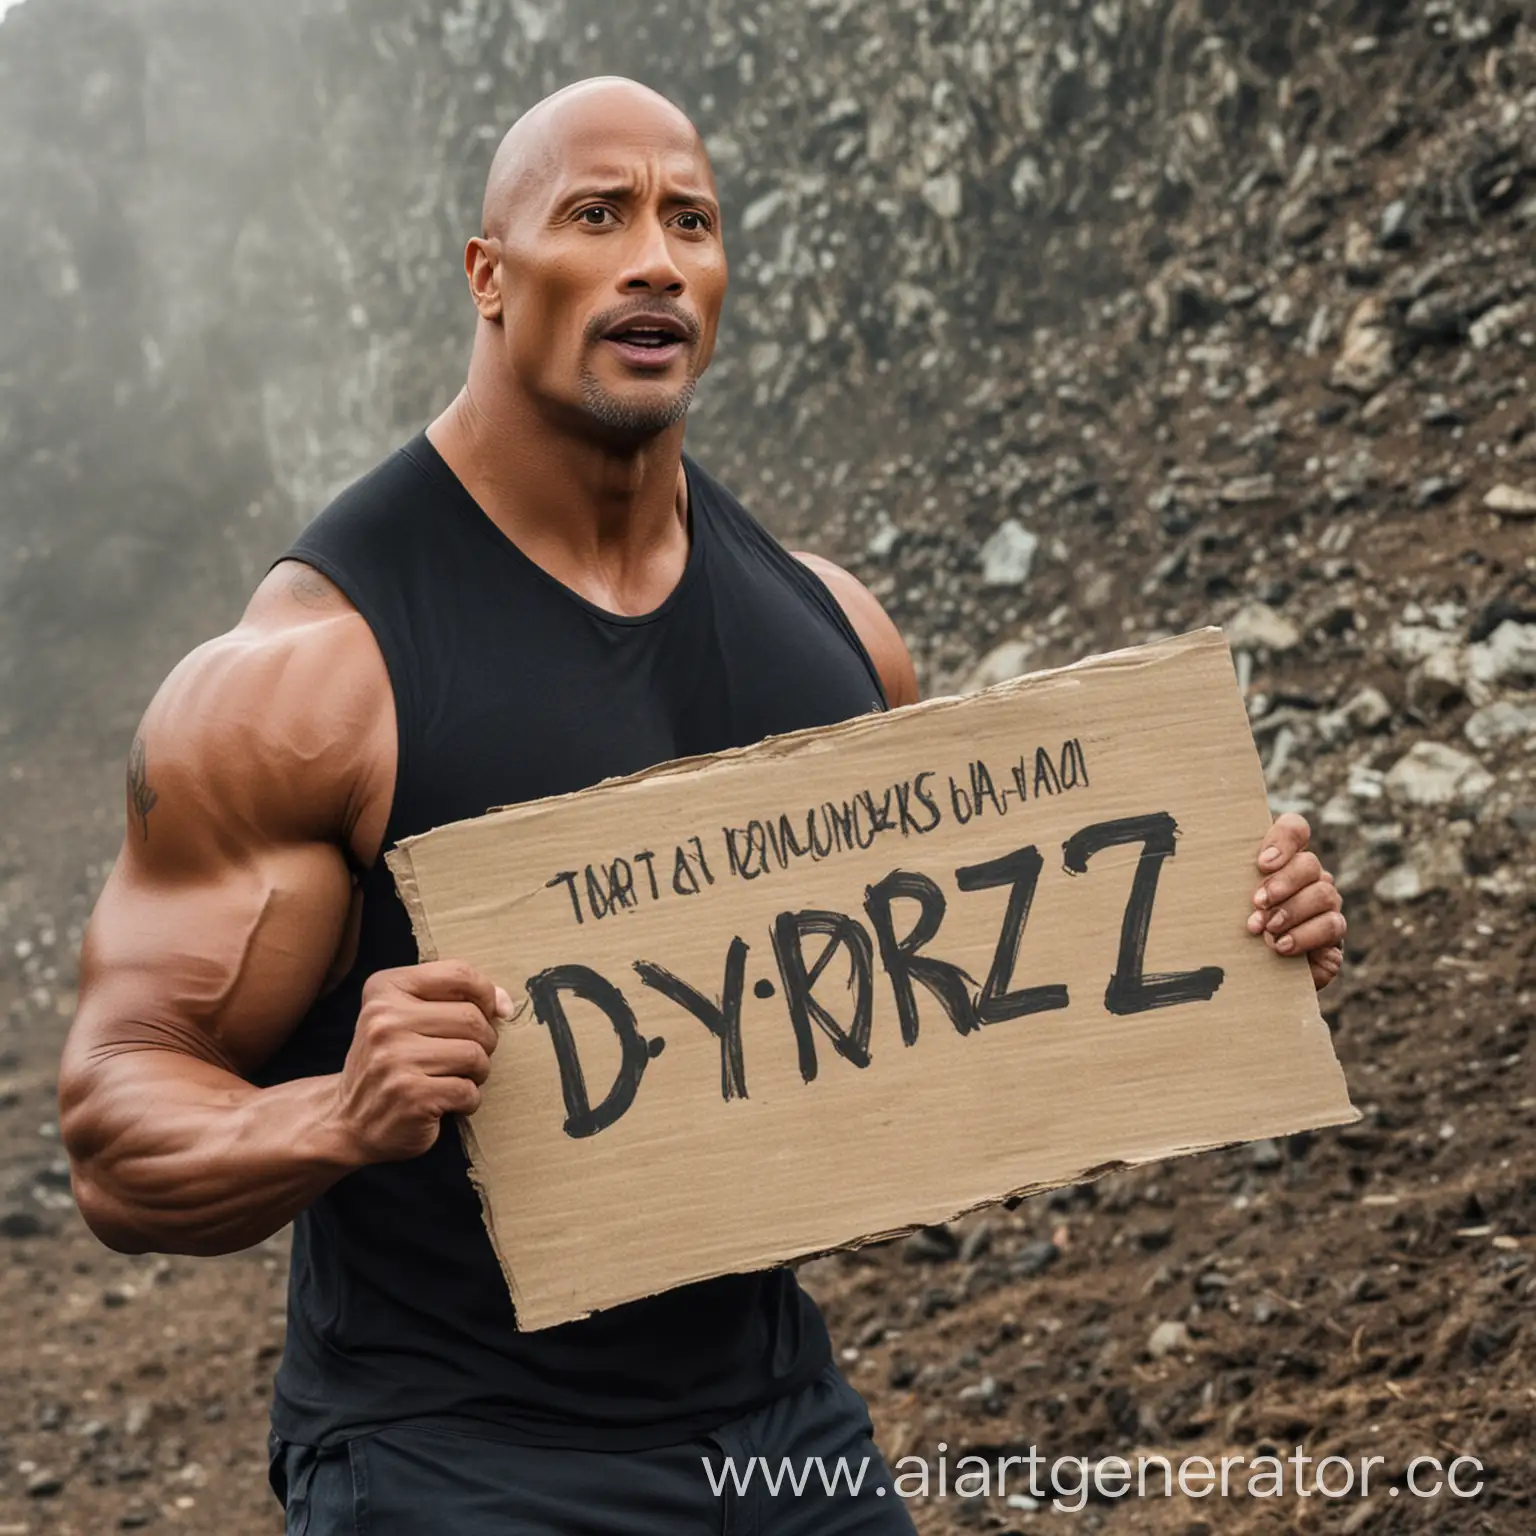 Dwayne-Johnson-Holding-Dyrqiz-Sign-Celebrity-Protest-for-a-Mysterious-Cause